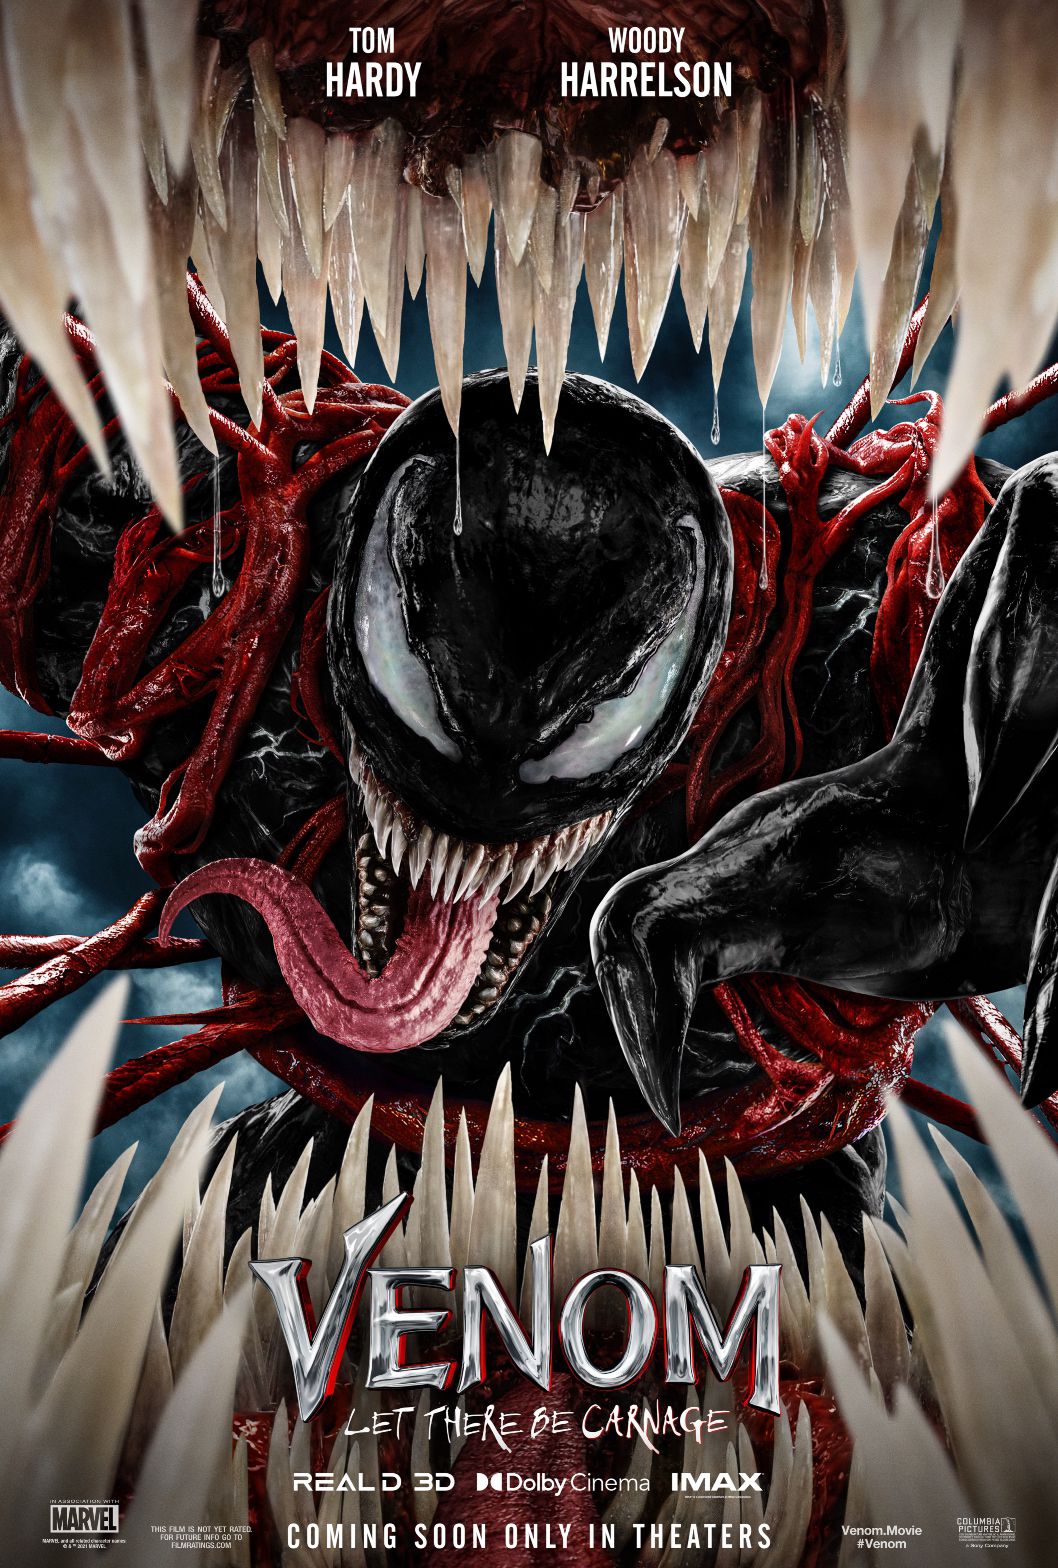 Venom 2 Let There Be Carnage poster